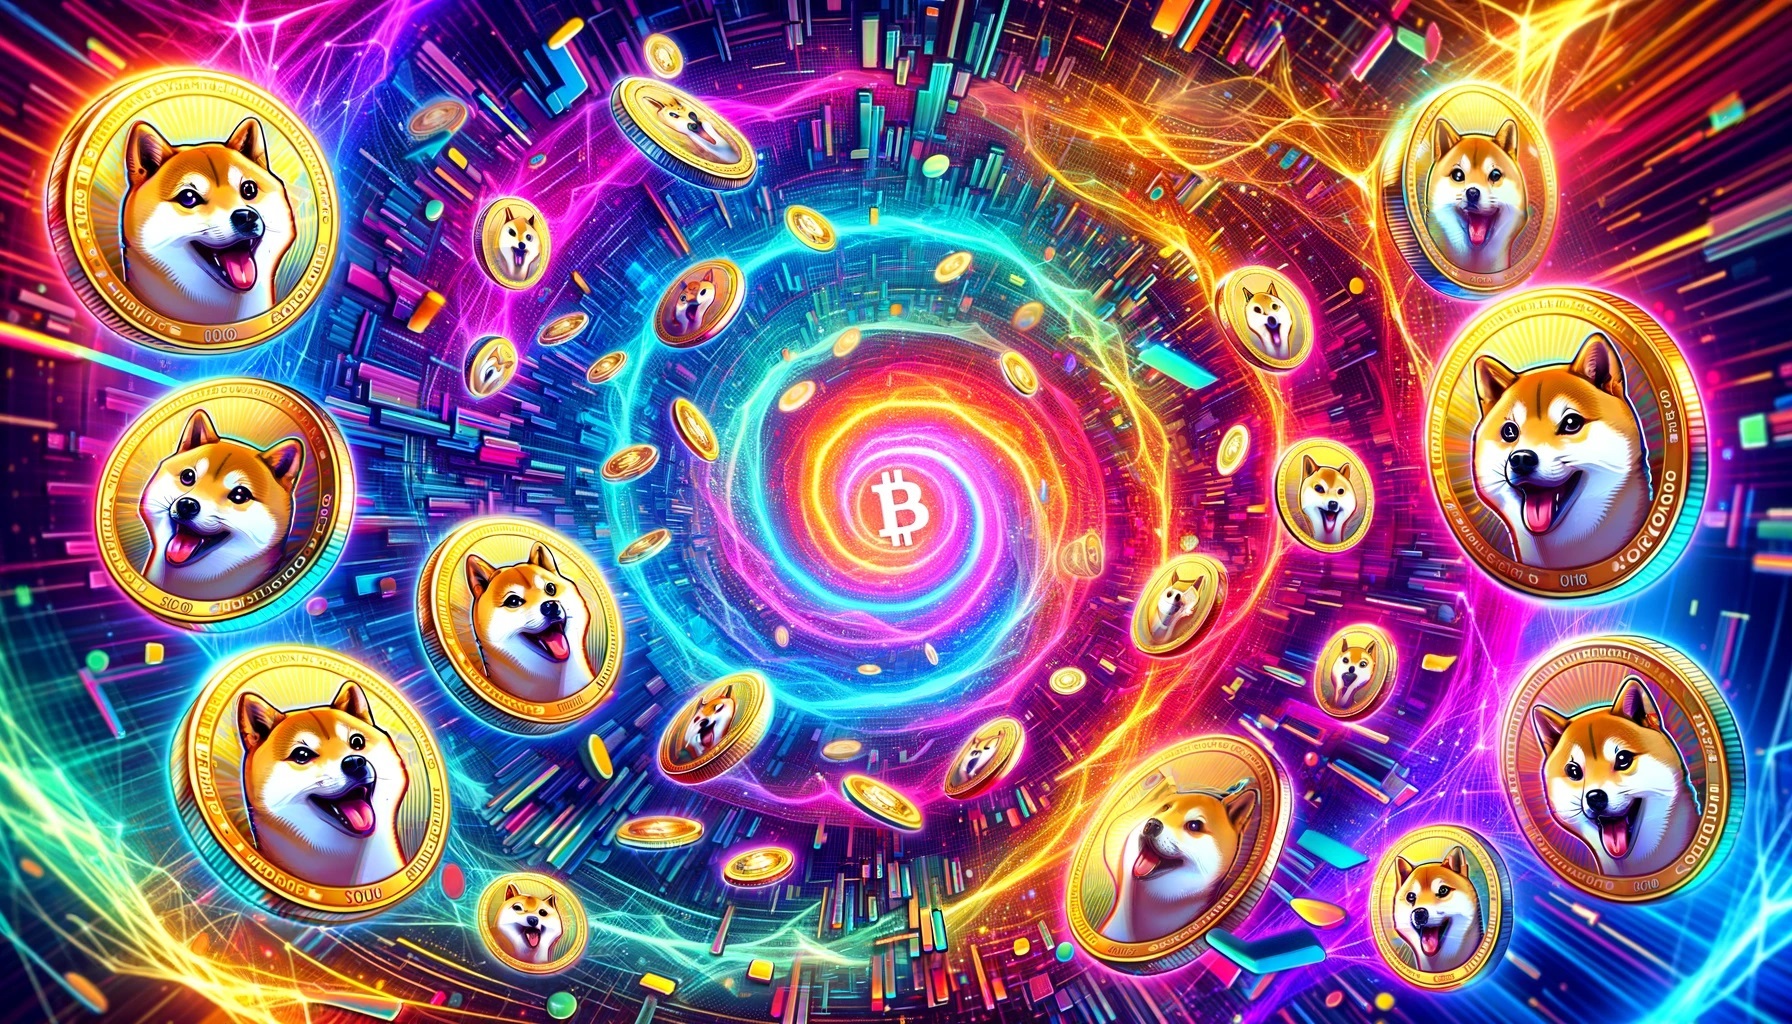 Featured image for “Shiba Inu, PEPE, Dogecoin Surge: A Closer Look By Expert”